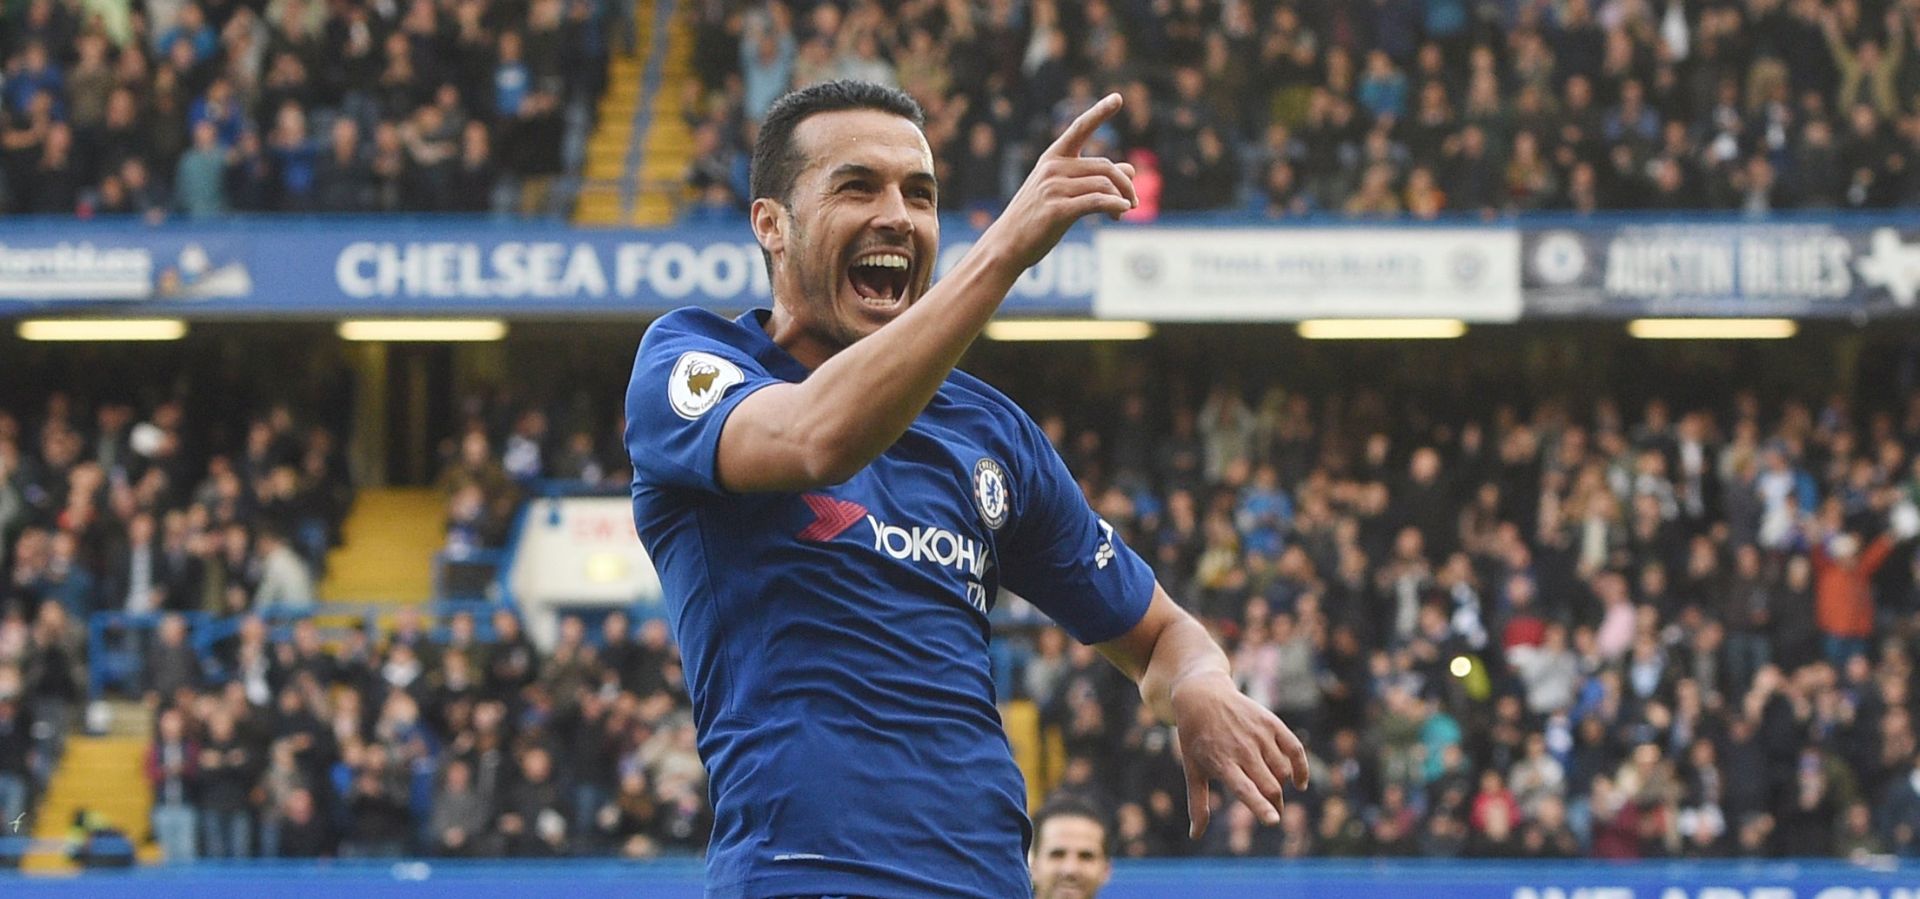 epa06280068 Chelsea's Pedro celebrates scoring a goal during the English Premier League soccer match between Chelsea FC and Watford FC at Stamford Bridge in London, Britain, 21 October 2017.  EPA/FACUNDO ARRIZABALAGA EDITORIAL USE ONLY. No use with unauthorized audio, video, data, fixture lists, club/league logos or 'live' services. Online in-match use limited to 75 images, no video emulation. No use in betting, games or single club/league/player publications.